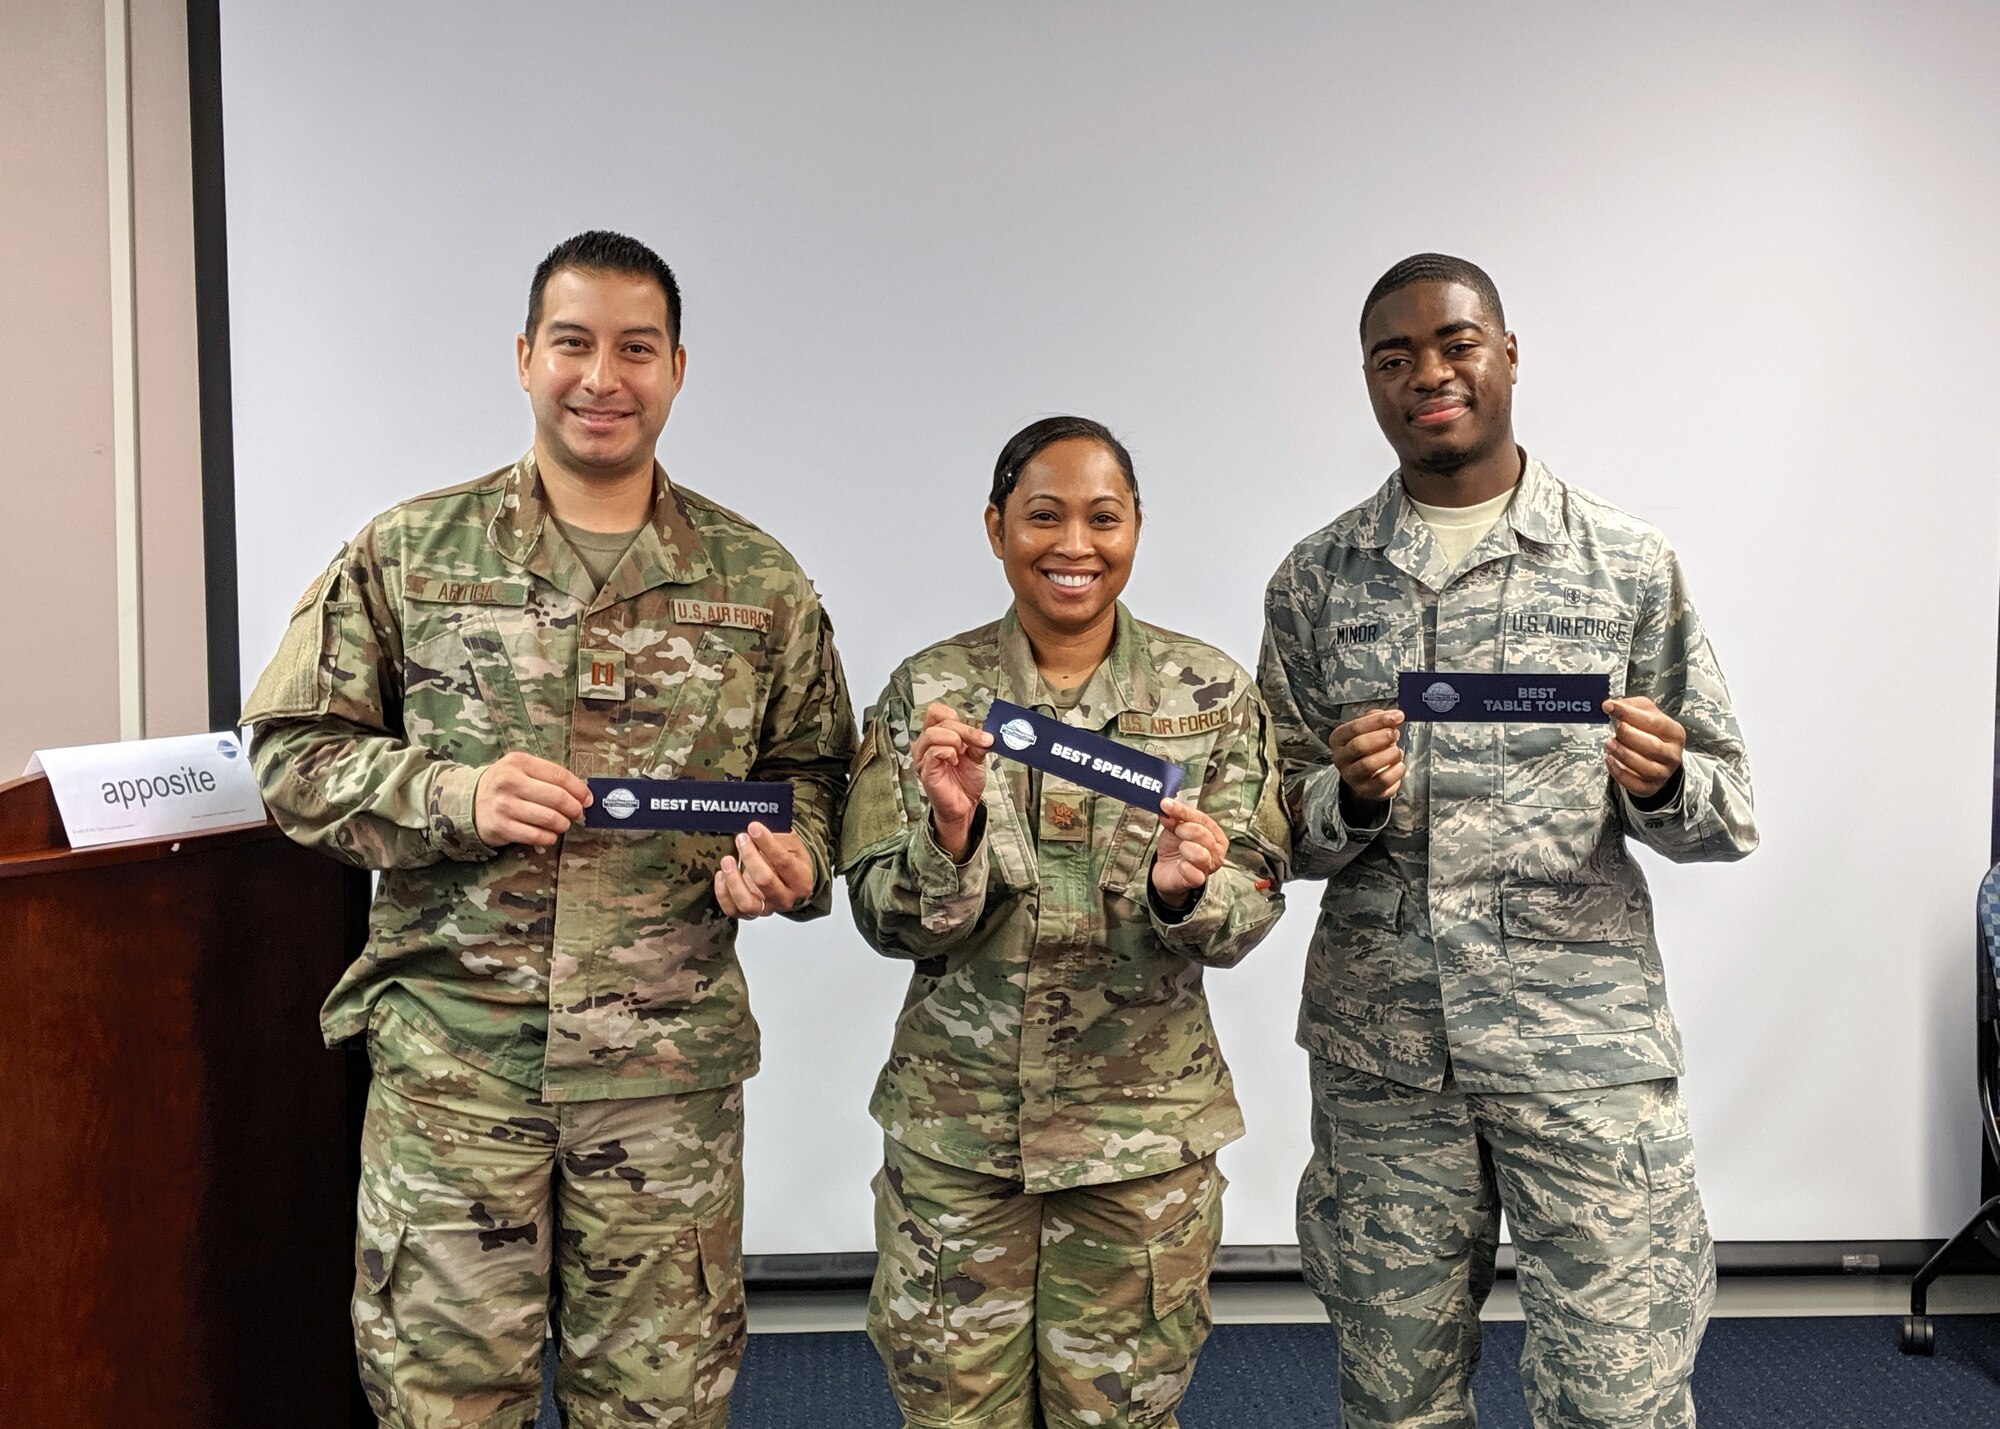 47th Flying Training Wing Airmen pose for a photo after a Toastmasters meeting on Nov. 13, 2019 at Laughlin Air Force Base, Texas. After every meeting members vote on who delivered the best speech and are awarded with a ribbon for their efforts. (U.S. Air Force photo by Senior Airman John A. Crawford)